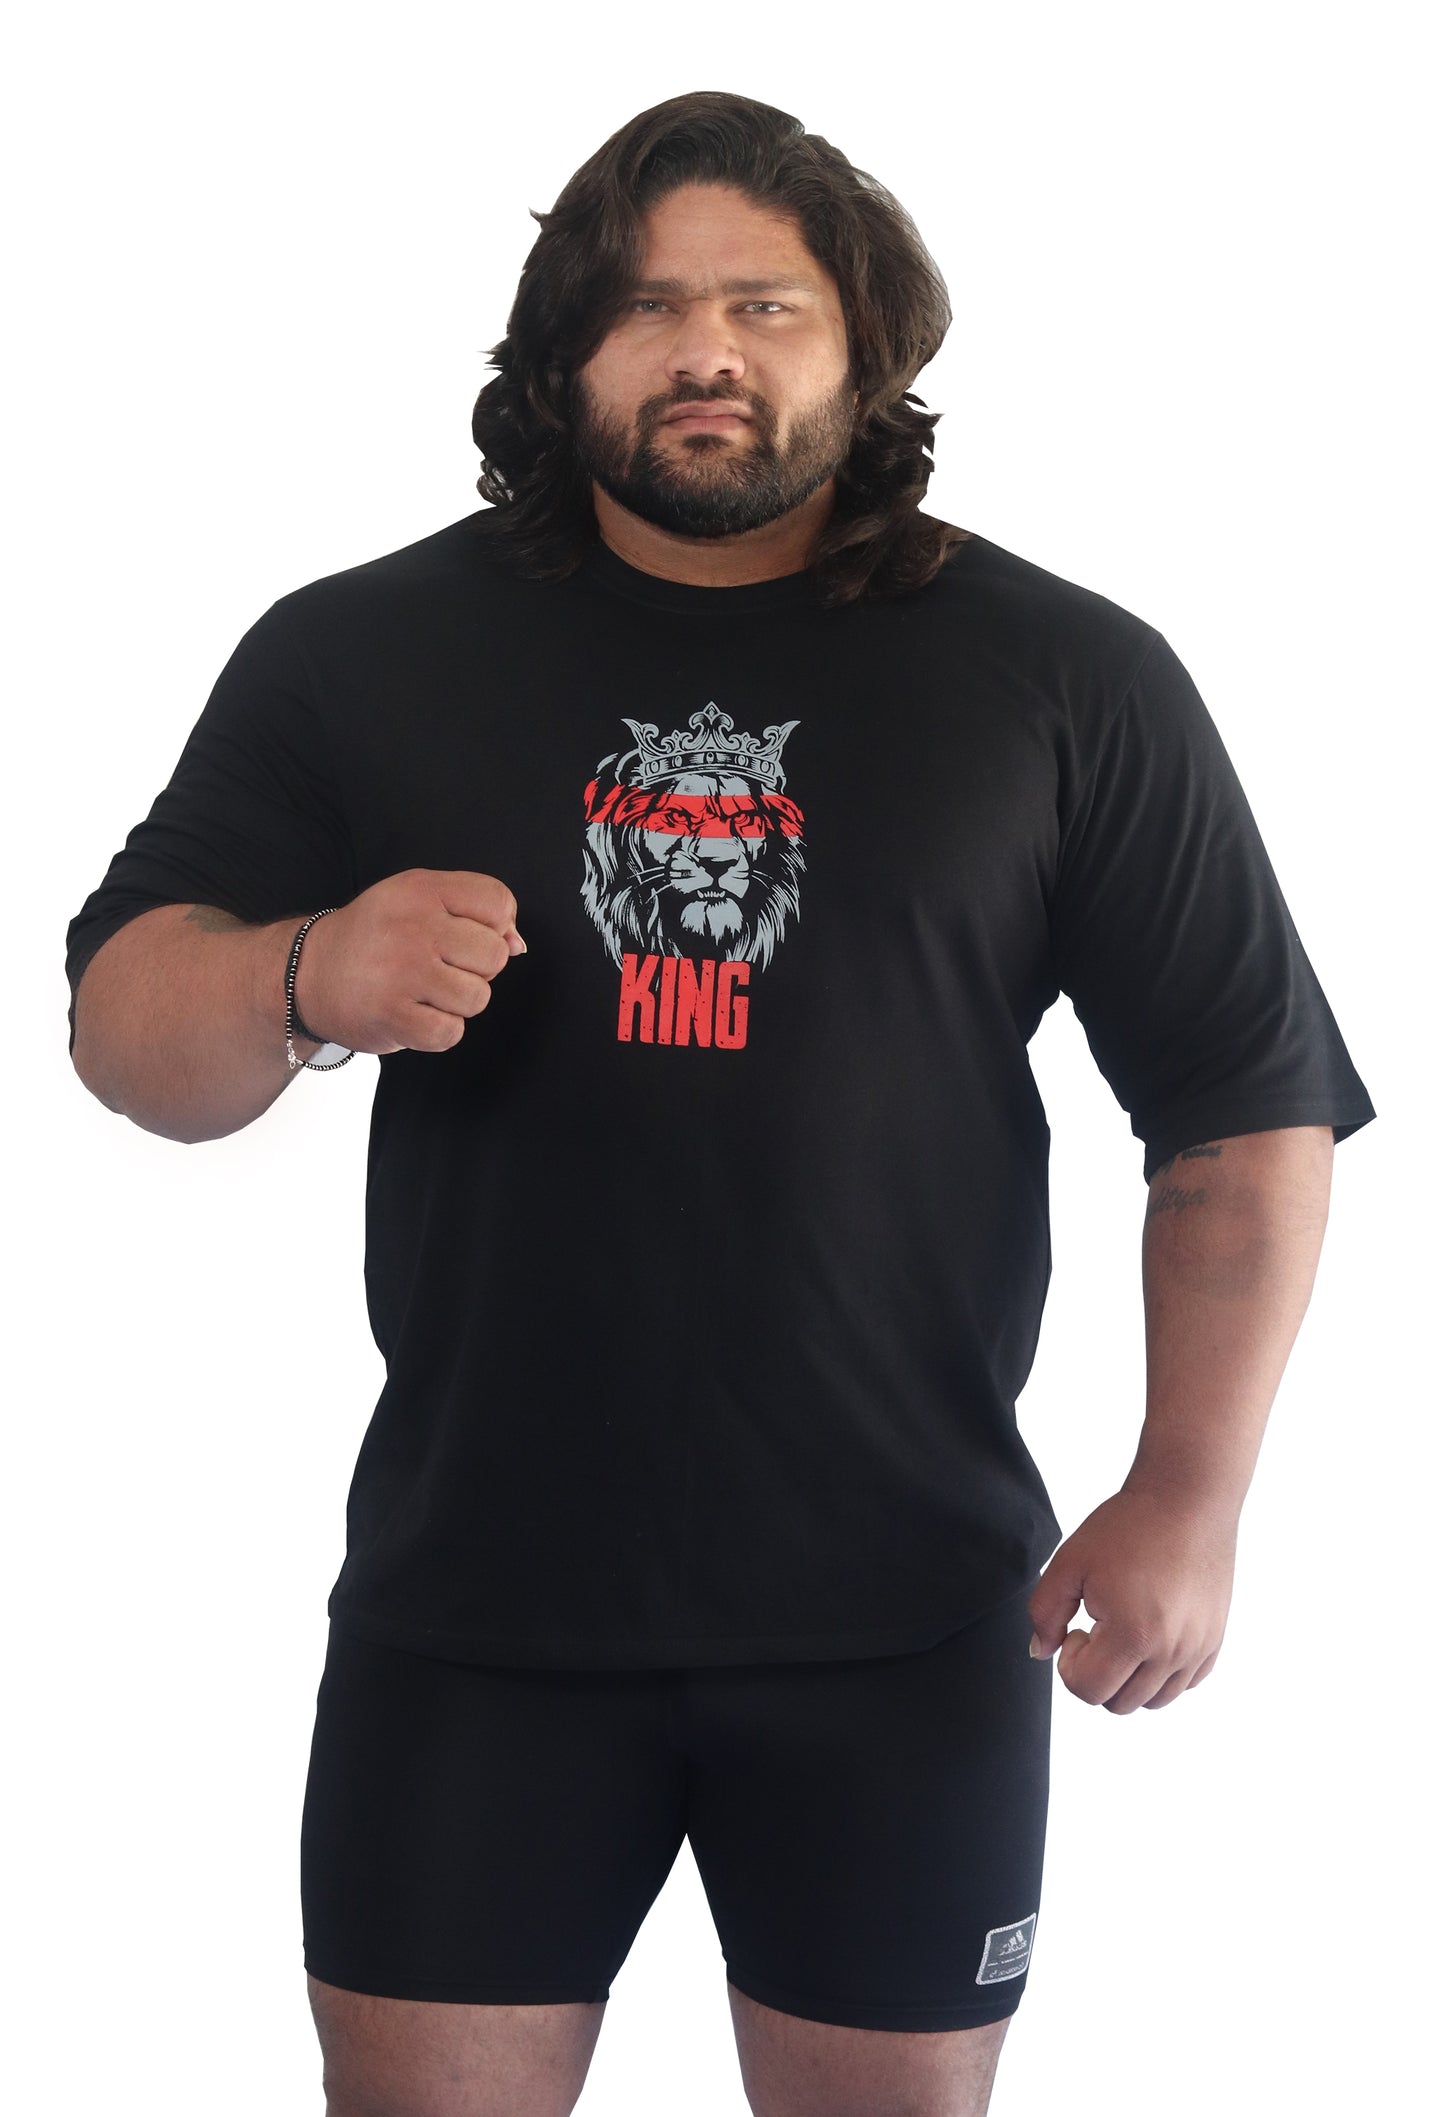 Live like a KING - Gym Oversized T Shirt Strong Soul Shirts & Tops